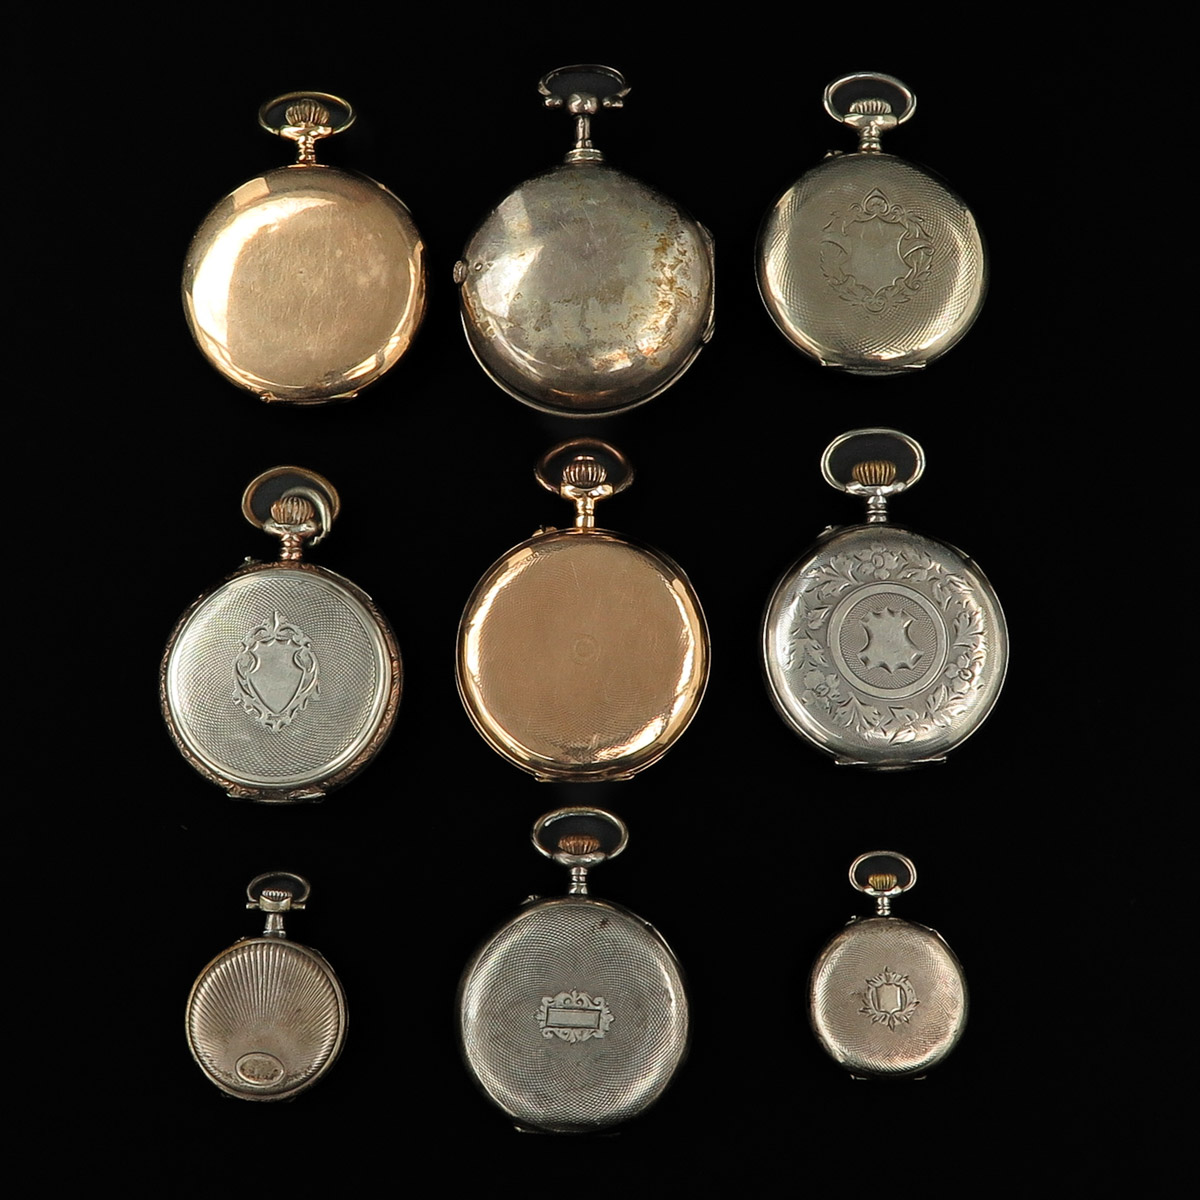 A Collection of 9 Pocket Watches - Image 2 of 10